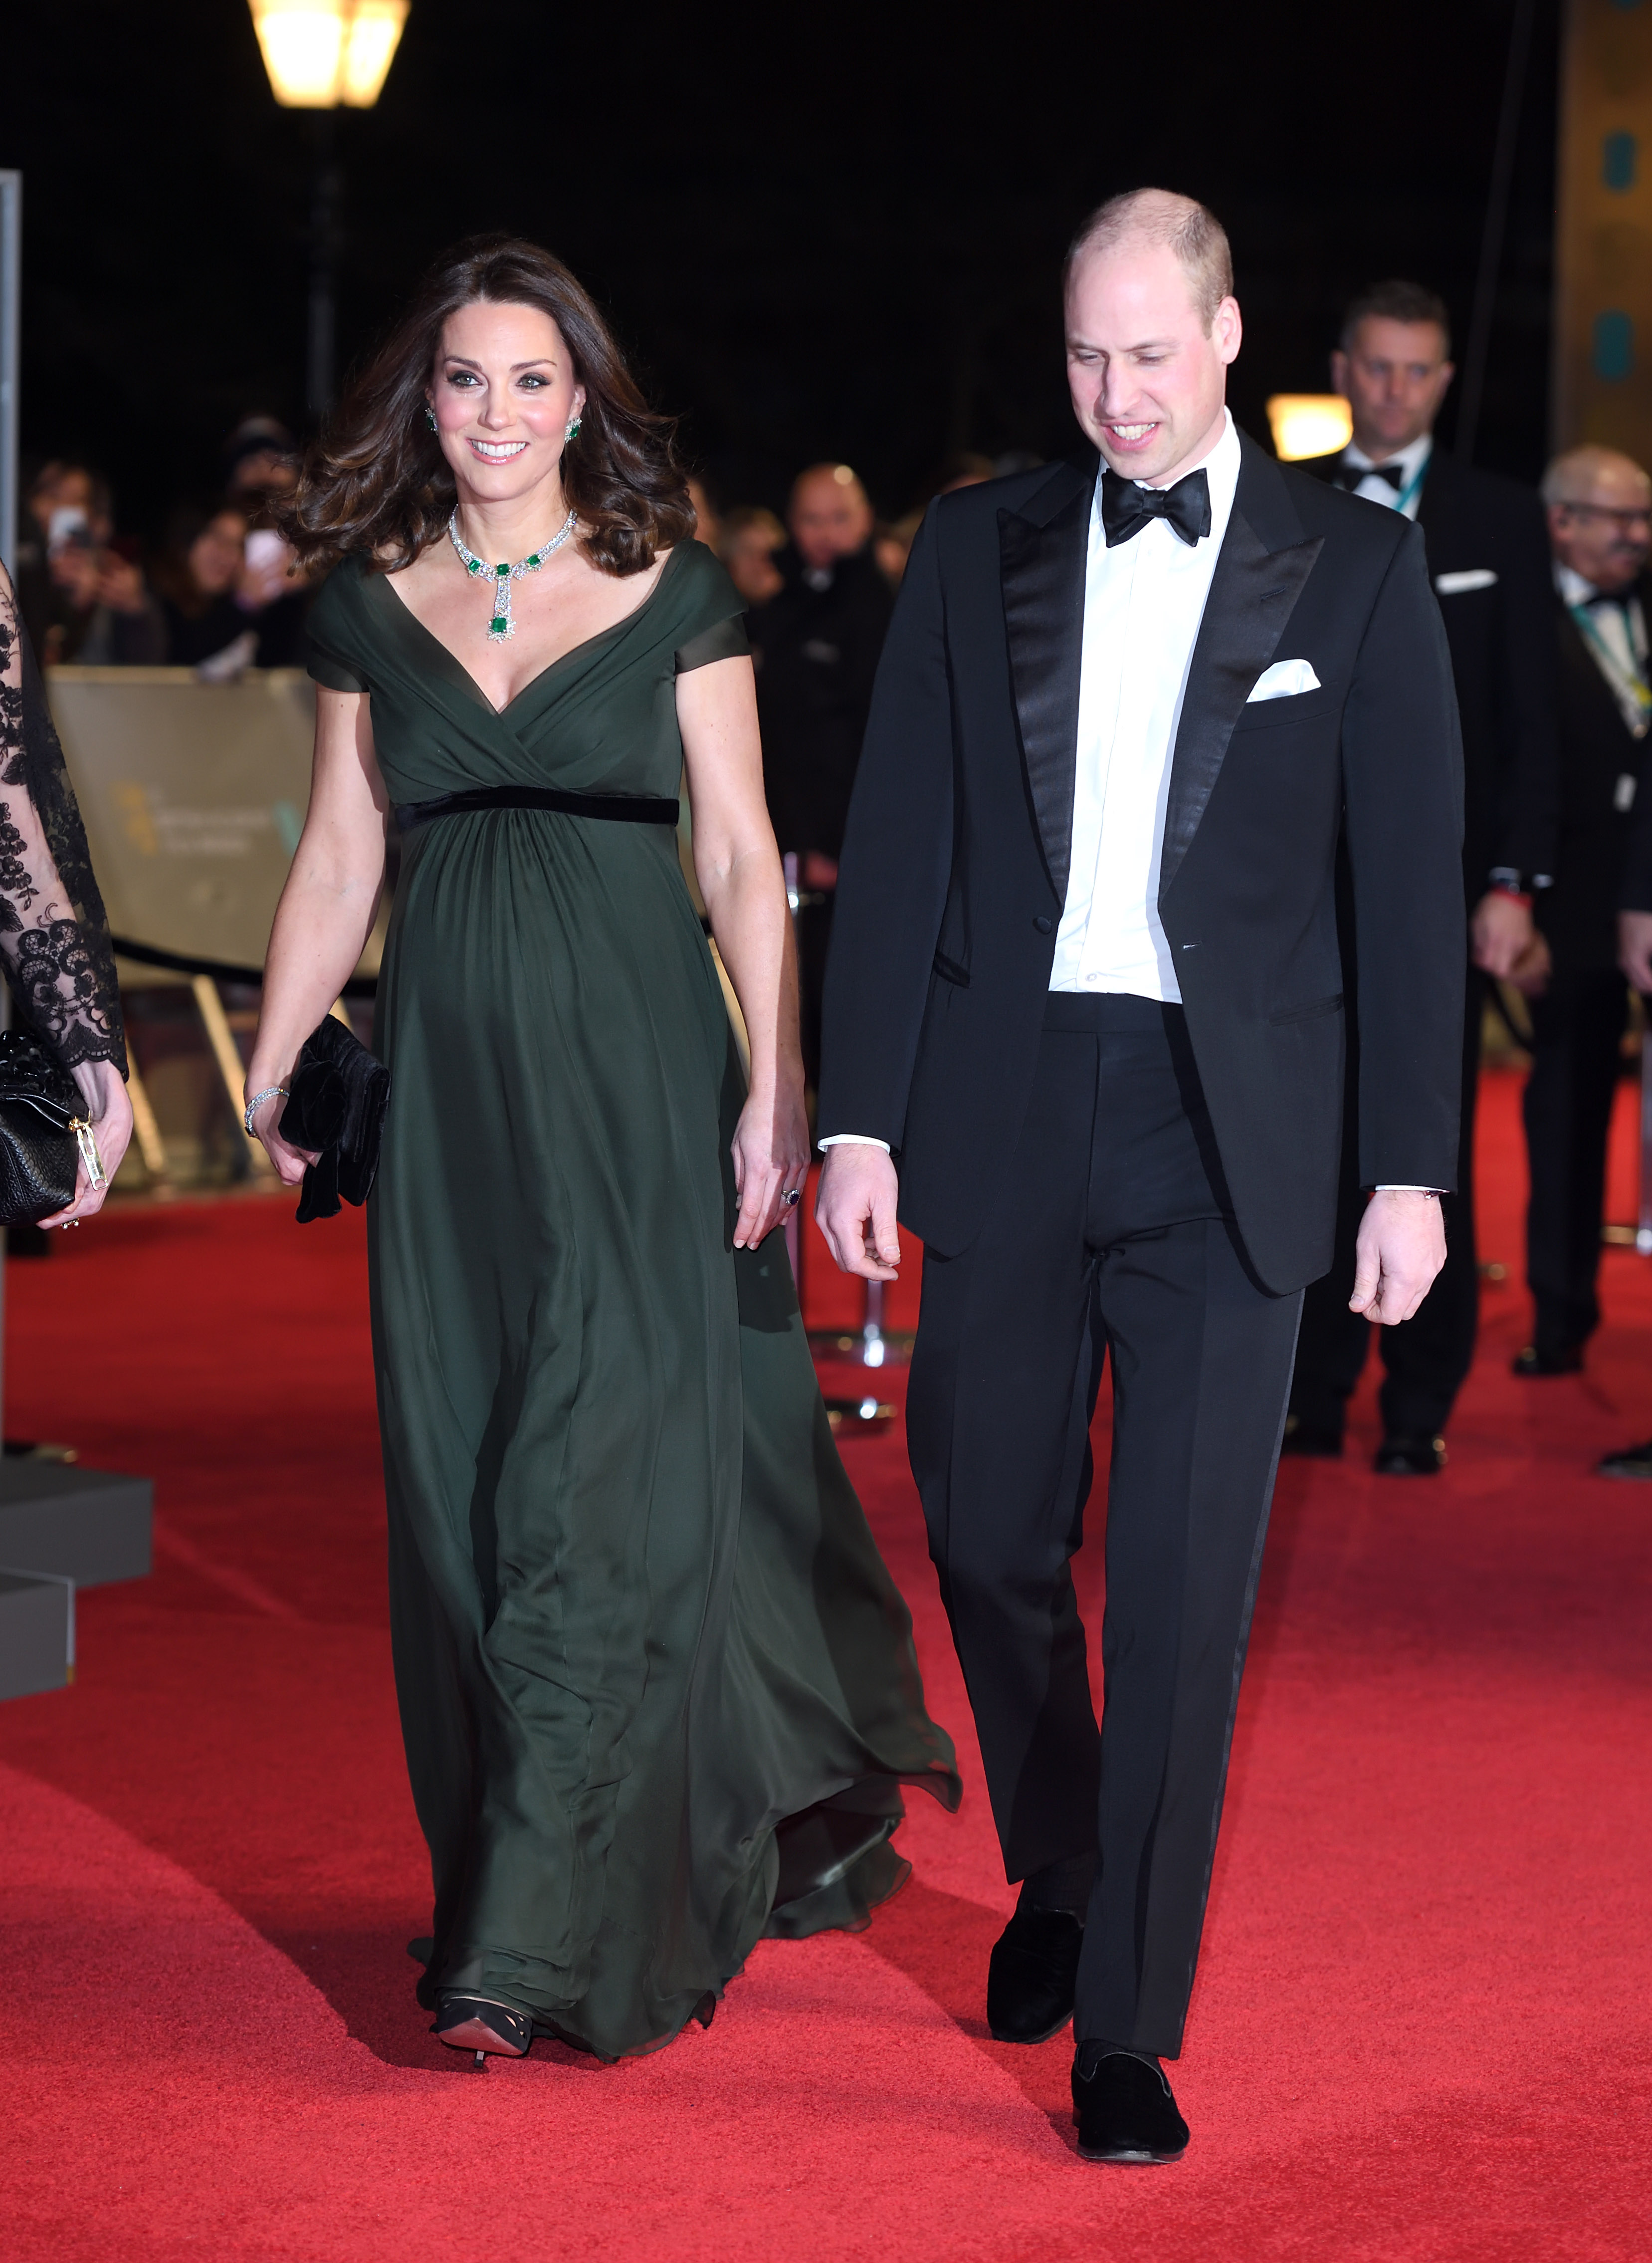 LONDON, ENGLAND - FEBRUARY 18: Catherine, Duchess of Cambridge and Prince William, Duke of Cambridge attend the EE British Academy Film Awards (BAFTAs) held at the Royal Albert Hall on February 18, 2018 in London, England. (Photo by Karwai Tang/WireImage)